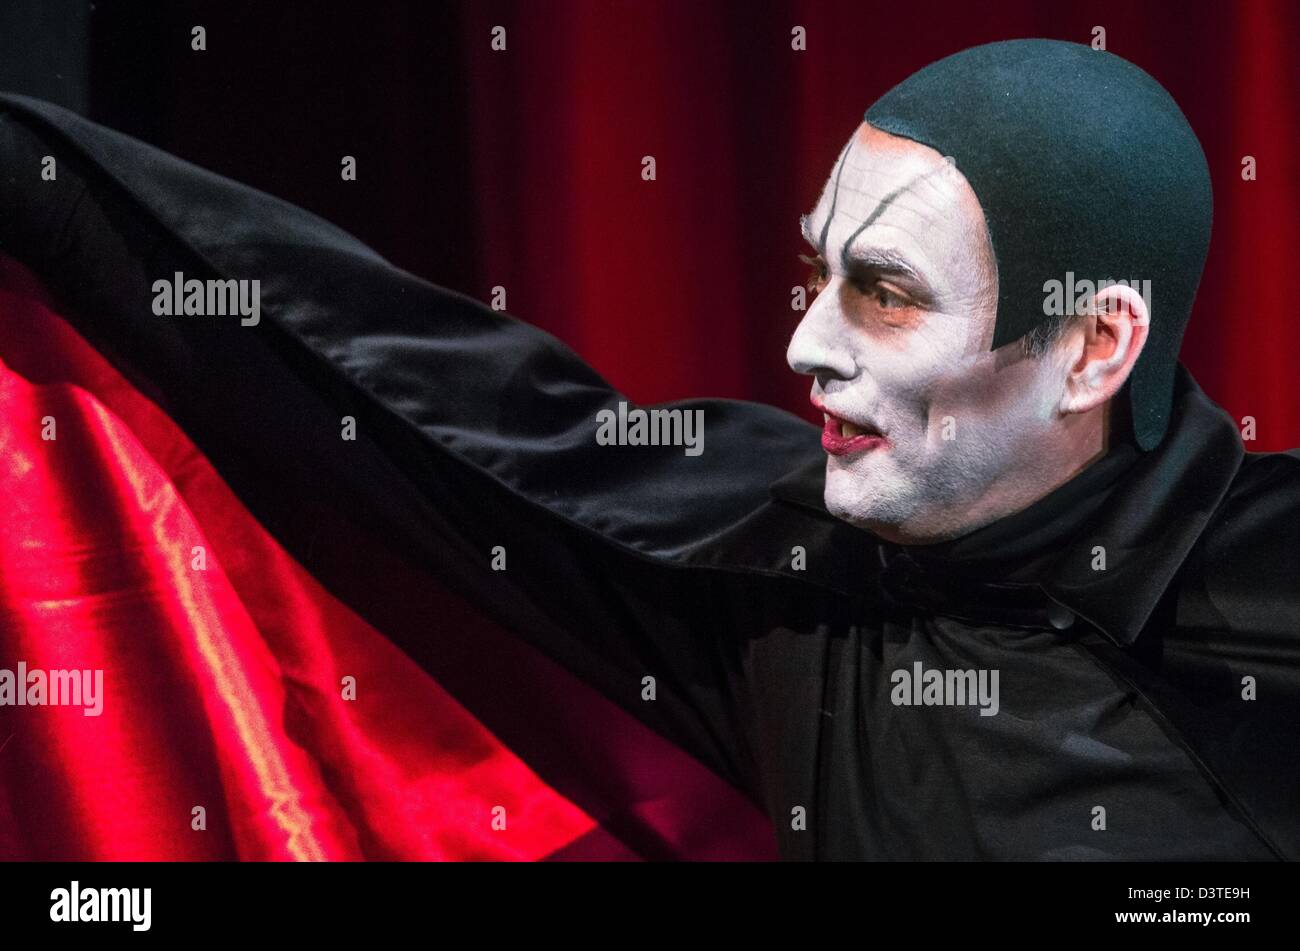 Actor Marcus Bluhm as &#39;Hendrik Hoefgen in the role of Mephisto&#39; performs on stage during the photo rehearsal of &#39;Mephisto&#39; in Hamburg, Germany, ... - actor-marcus-bluhm-as-hendrik-hoefgen-in-the-role-of-mephisto-performs-D3TE9H